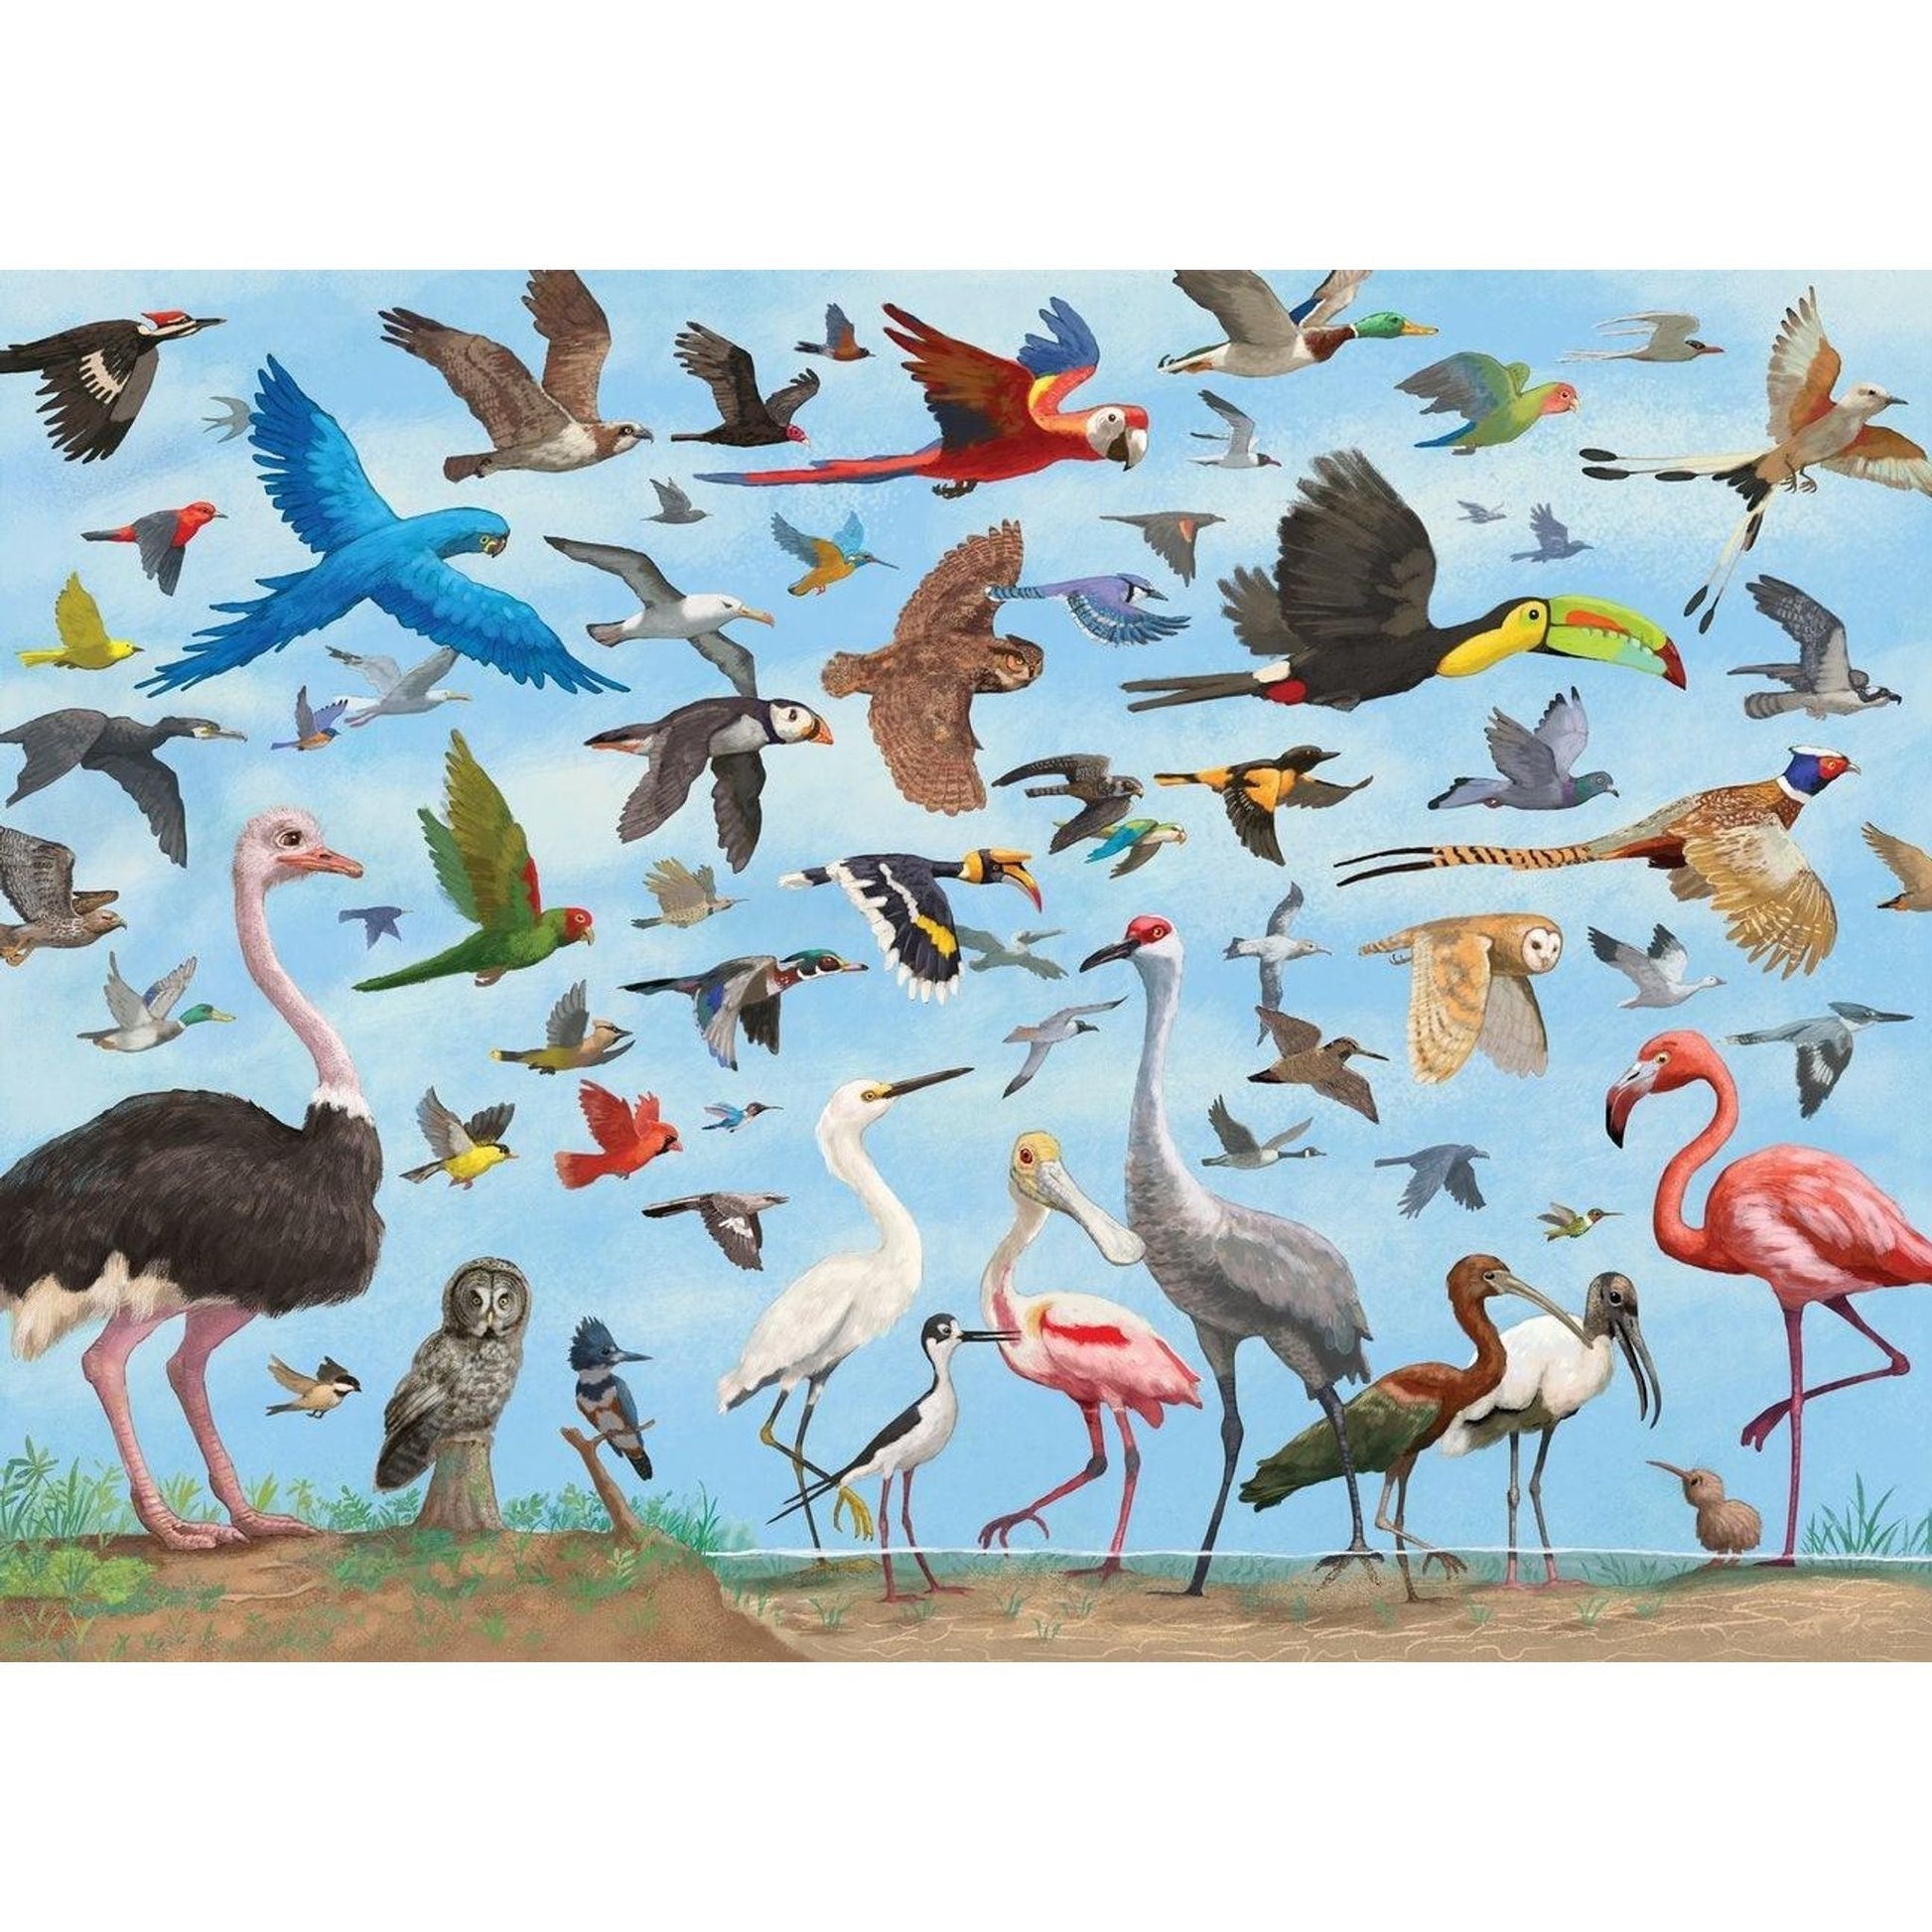 All the Birds Puzzle 1000 Pieces - Toybox Tales